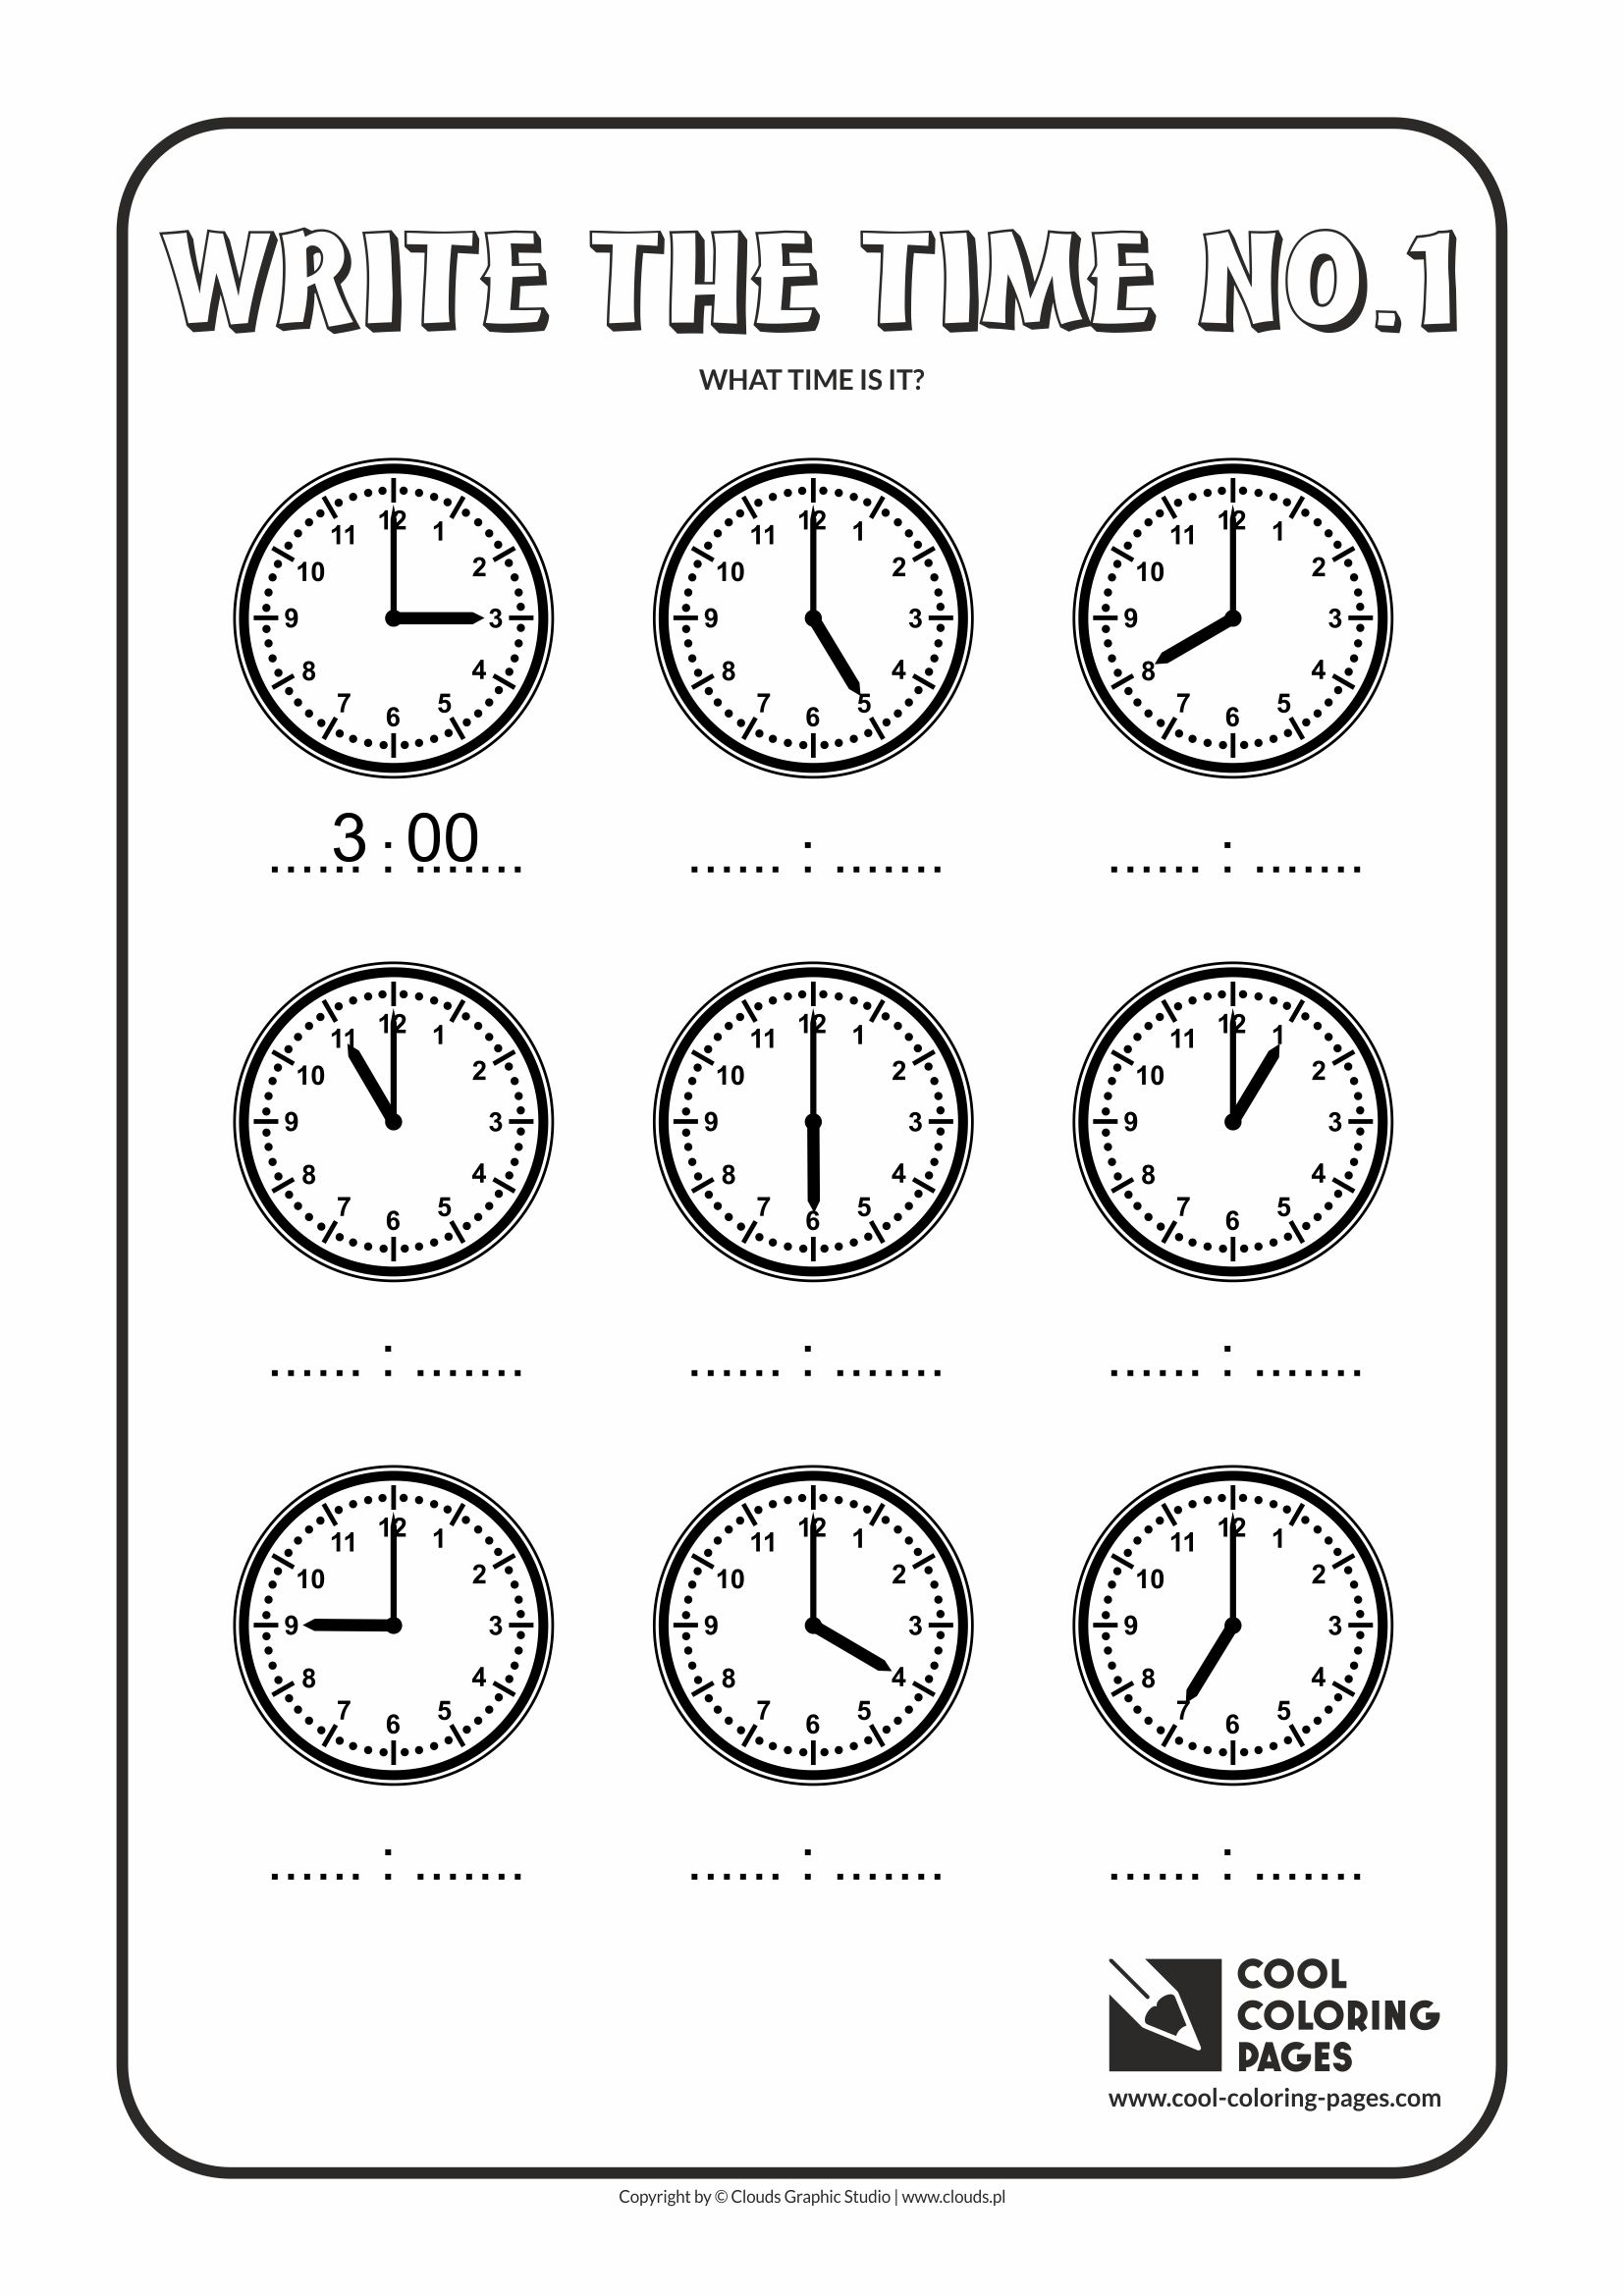 Cool Coloring Pages - Time / What time is it no.1